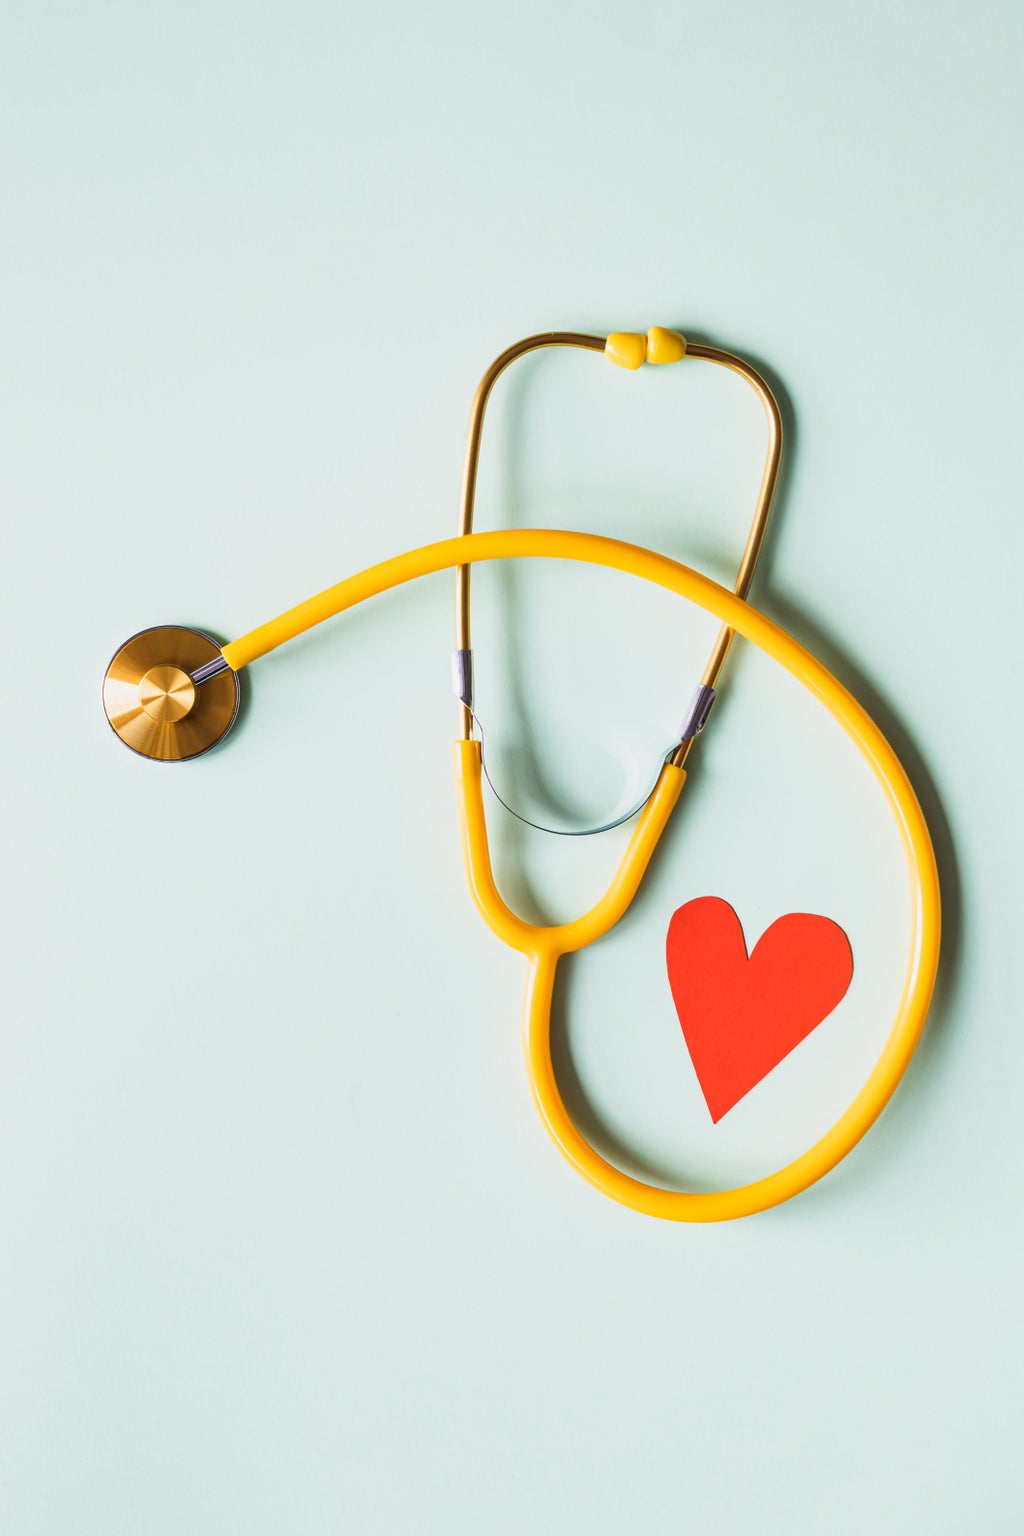 Yellow Stethoscope with red heart